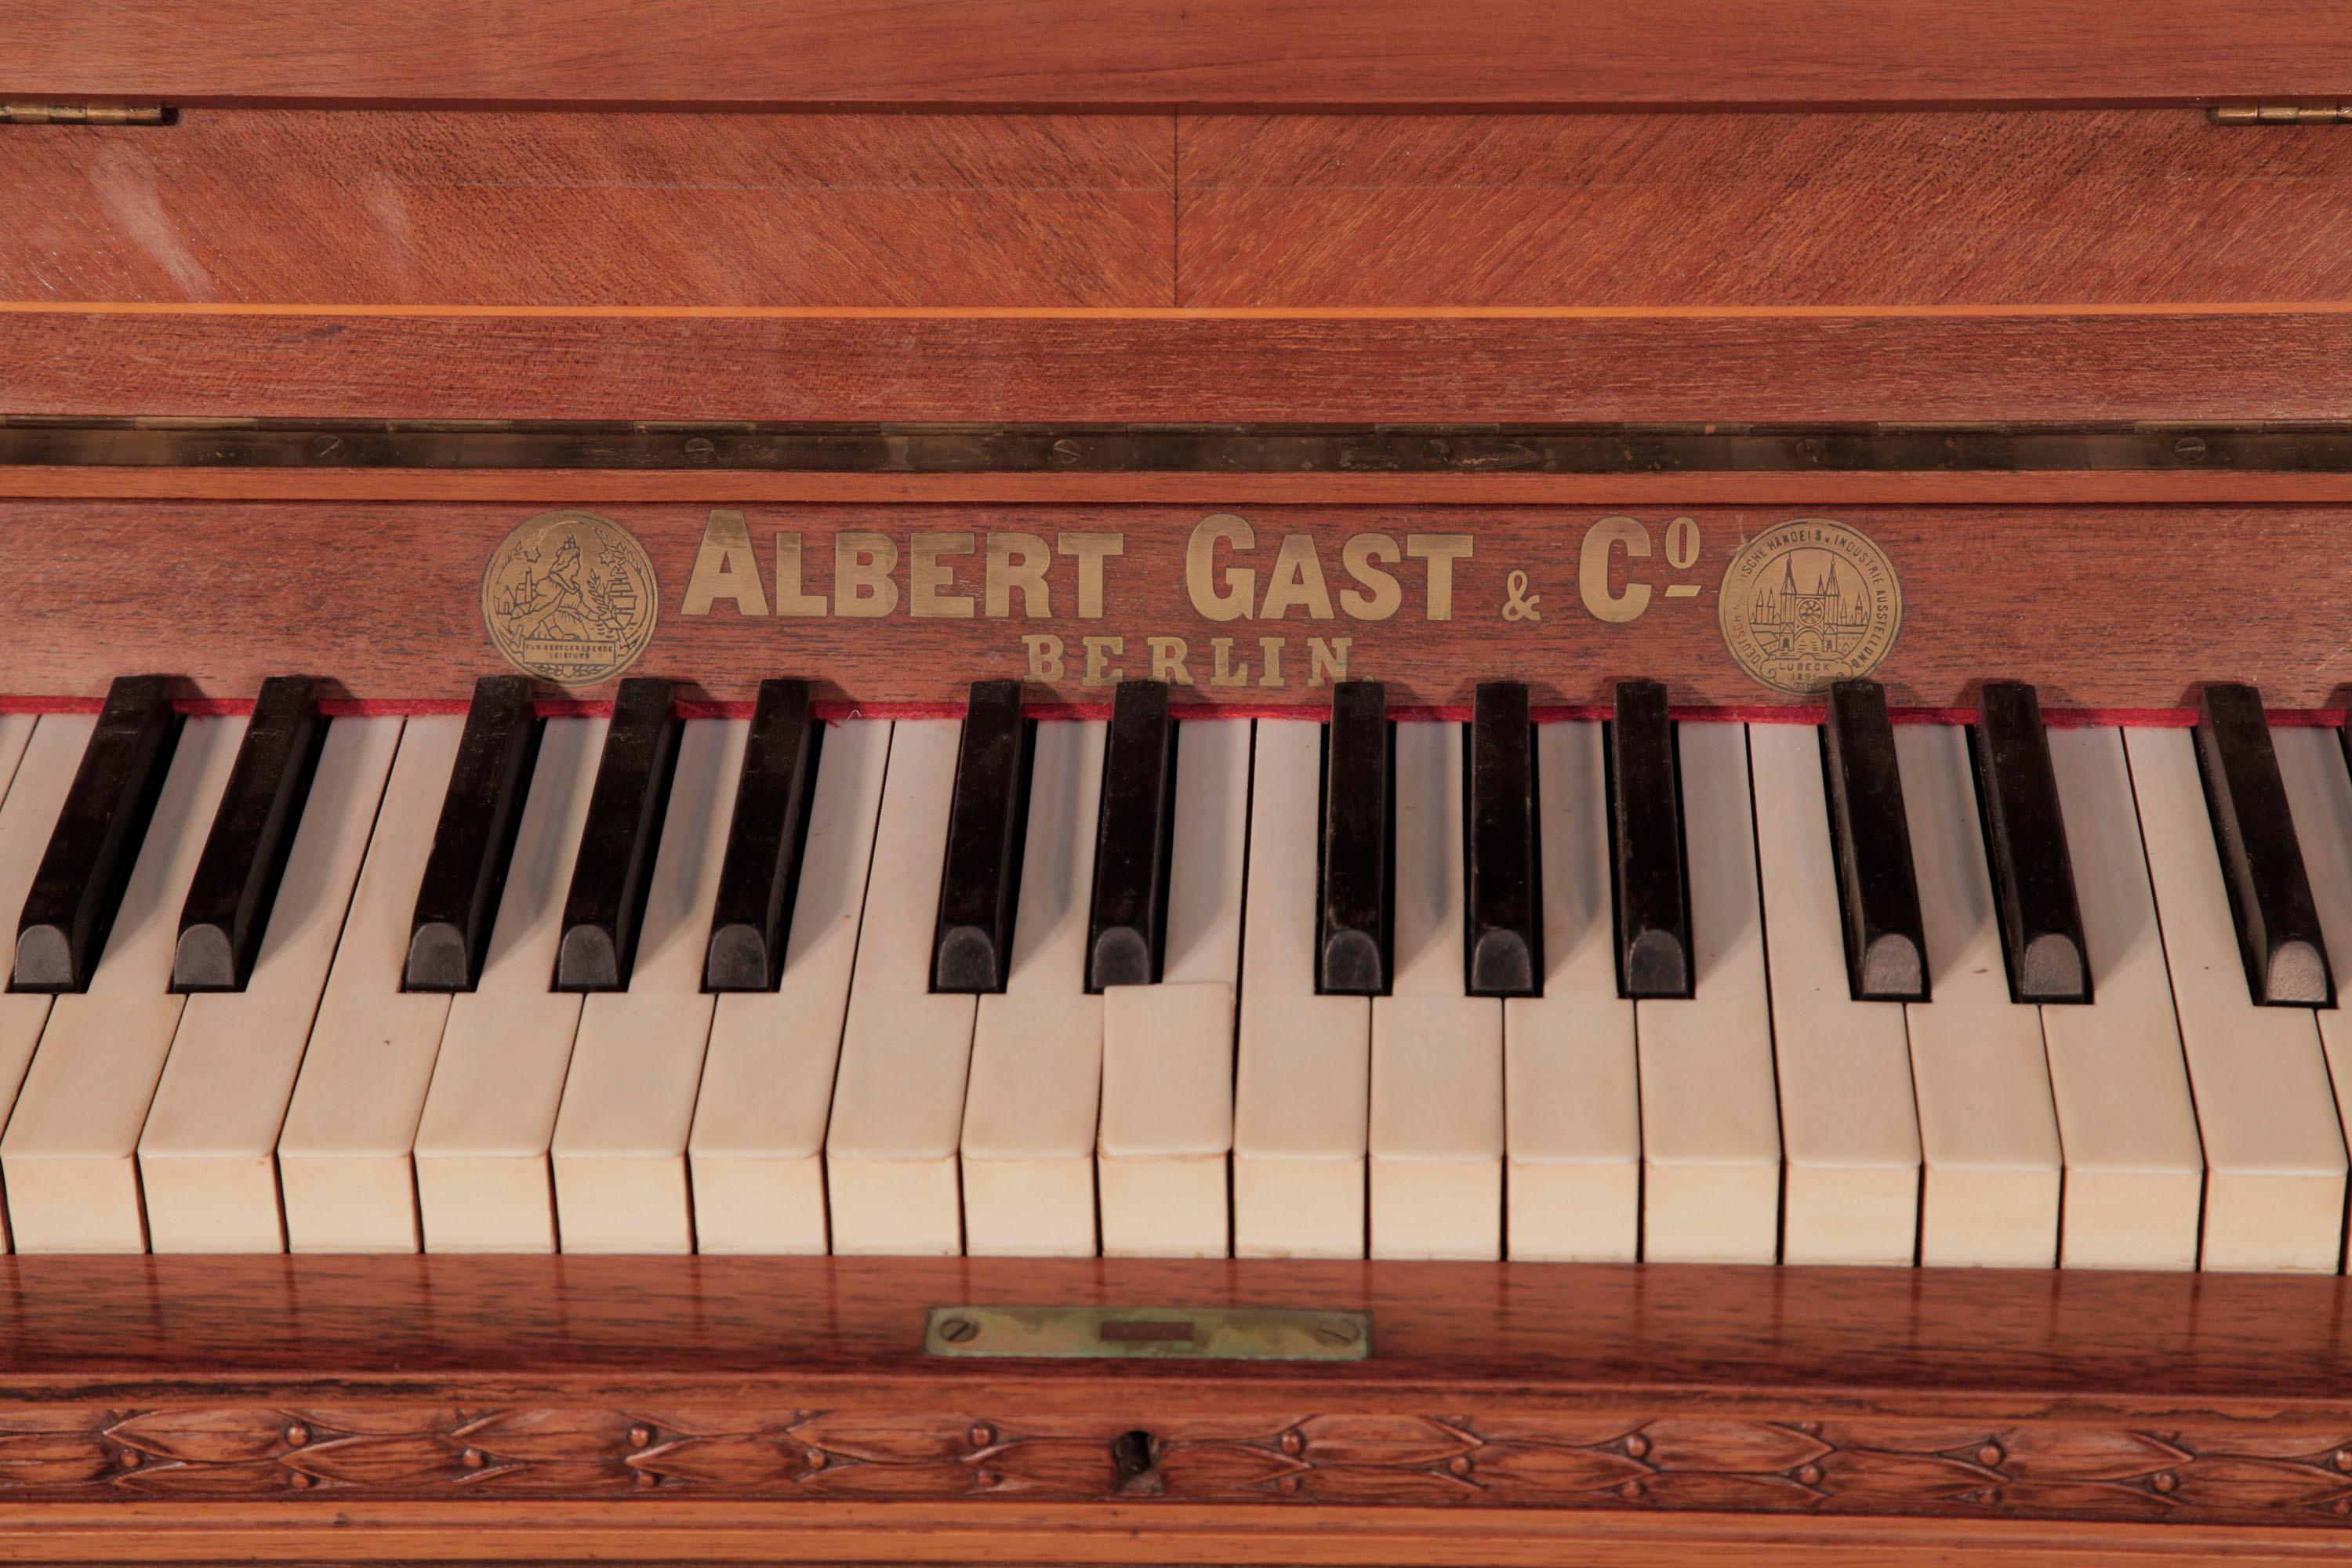 Gast Upright Piano Quartered Walnut Neoclassical Inlay Brass Candlesks en vente 7